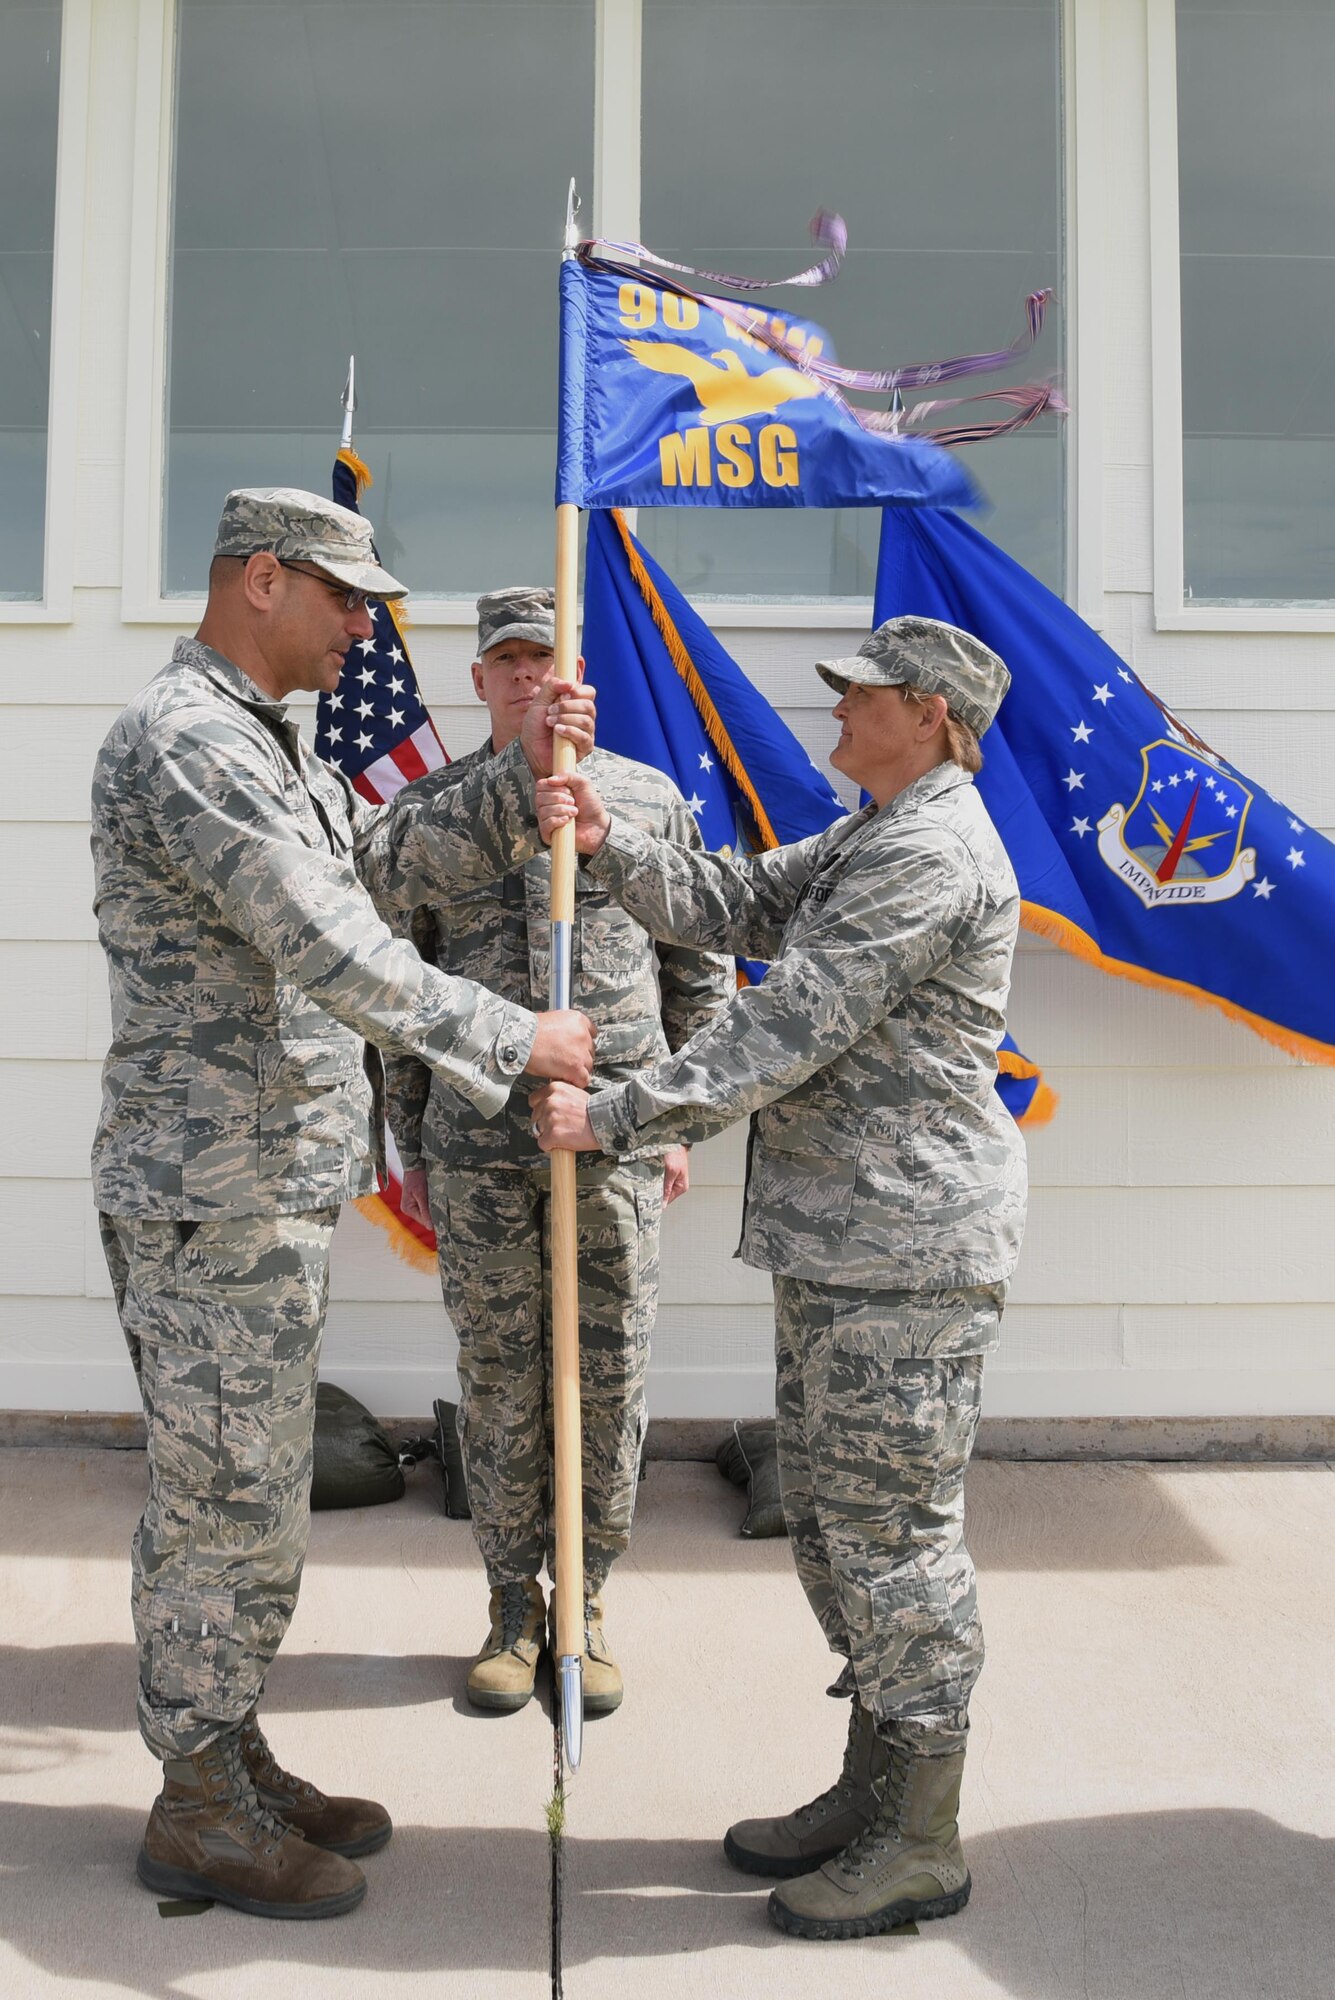 Colonel Stephen Kravitsky, 90th Missile Wing commander, passes the guidon to Col. Tricia Van Den Top, 90th Mission Support Group commander, during the 90th MSG Change of Command ceremony June 16, 2017, on the Argonne Parade Field at F.E. Warren Air Force Base, Wyo. The ceremony signified the transition of command from Col. Frank Verdugo to Van Den Top. (U.S. Air Force photo by Glenn S. Robertson)